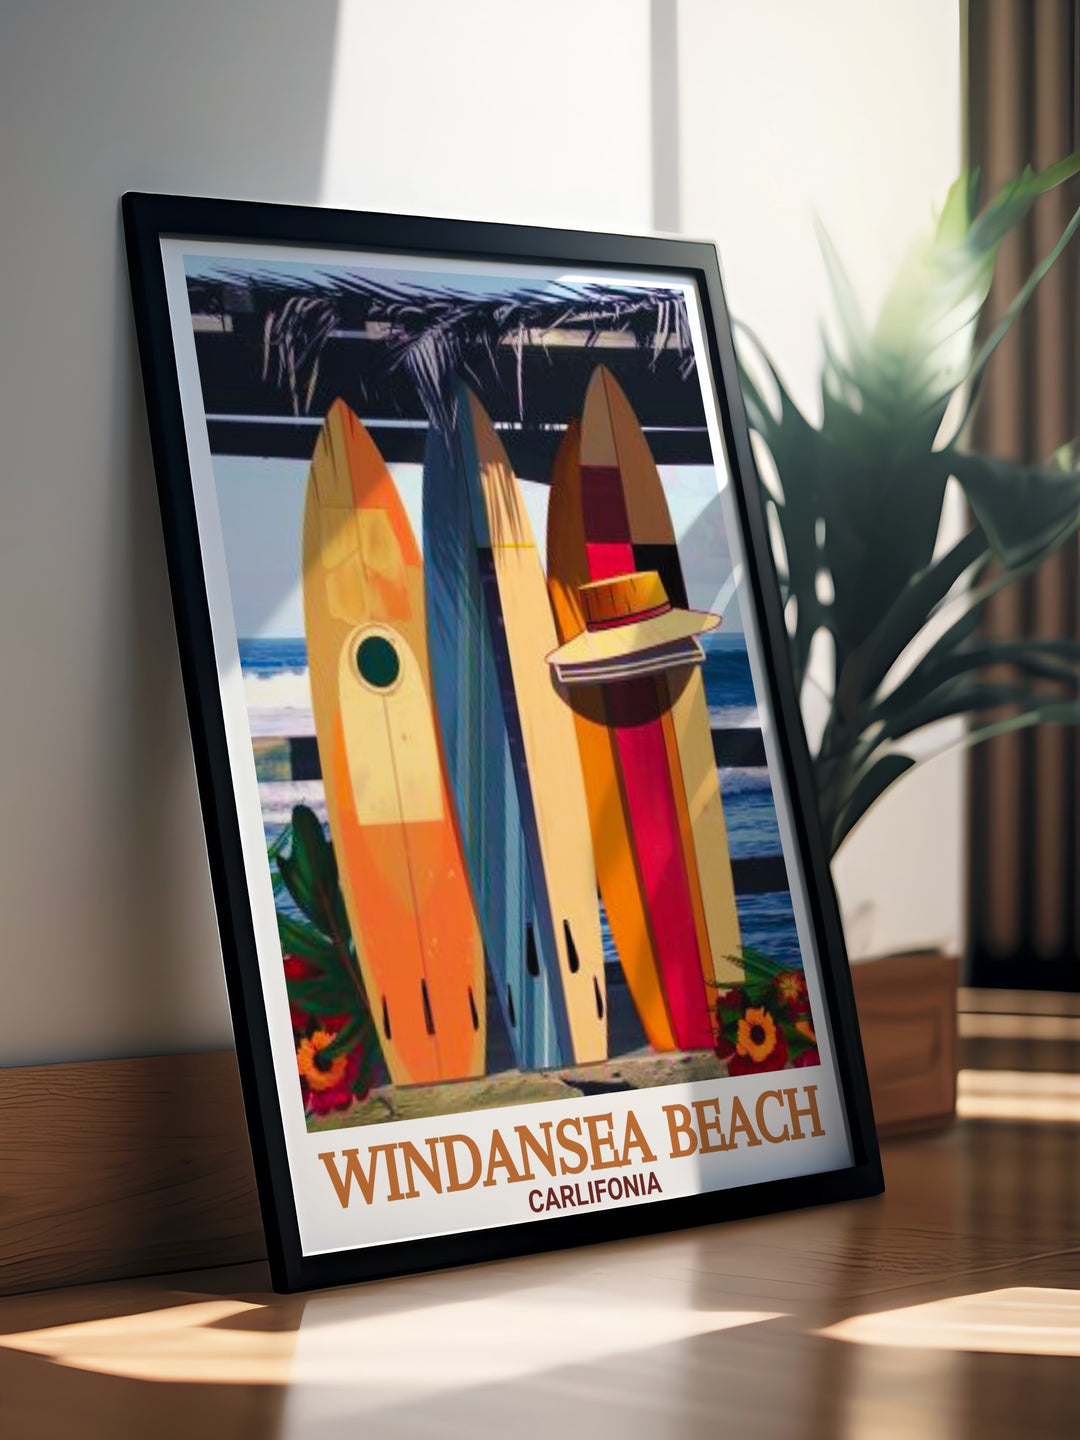 Windansea Beach Shack Gift print highlighting the iconic beach shack and stunning coastal scenery ideal for adding coastal charm to any room. This vintage poster is a perfect personalized gift and a beautiful piece of wall art.